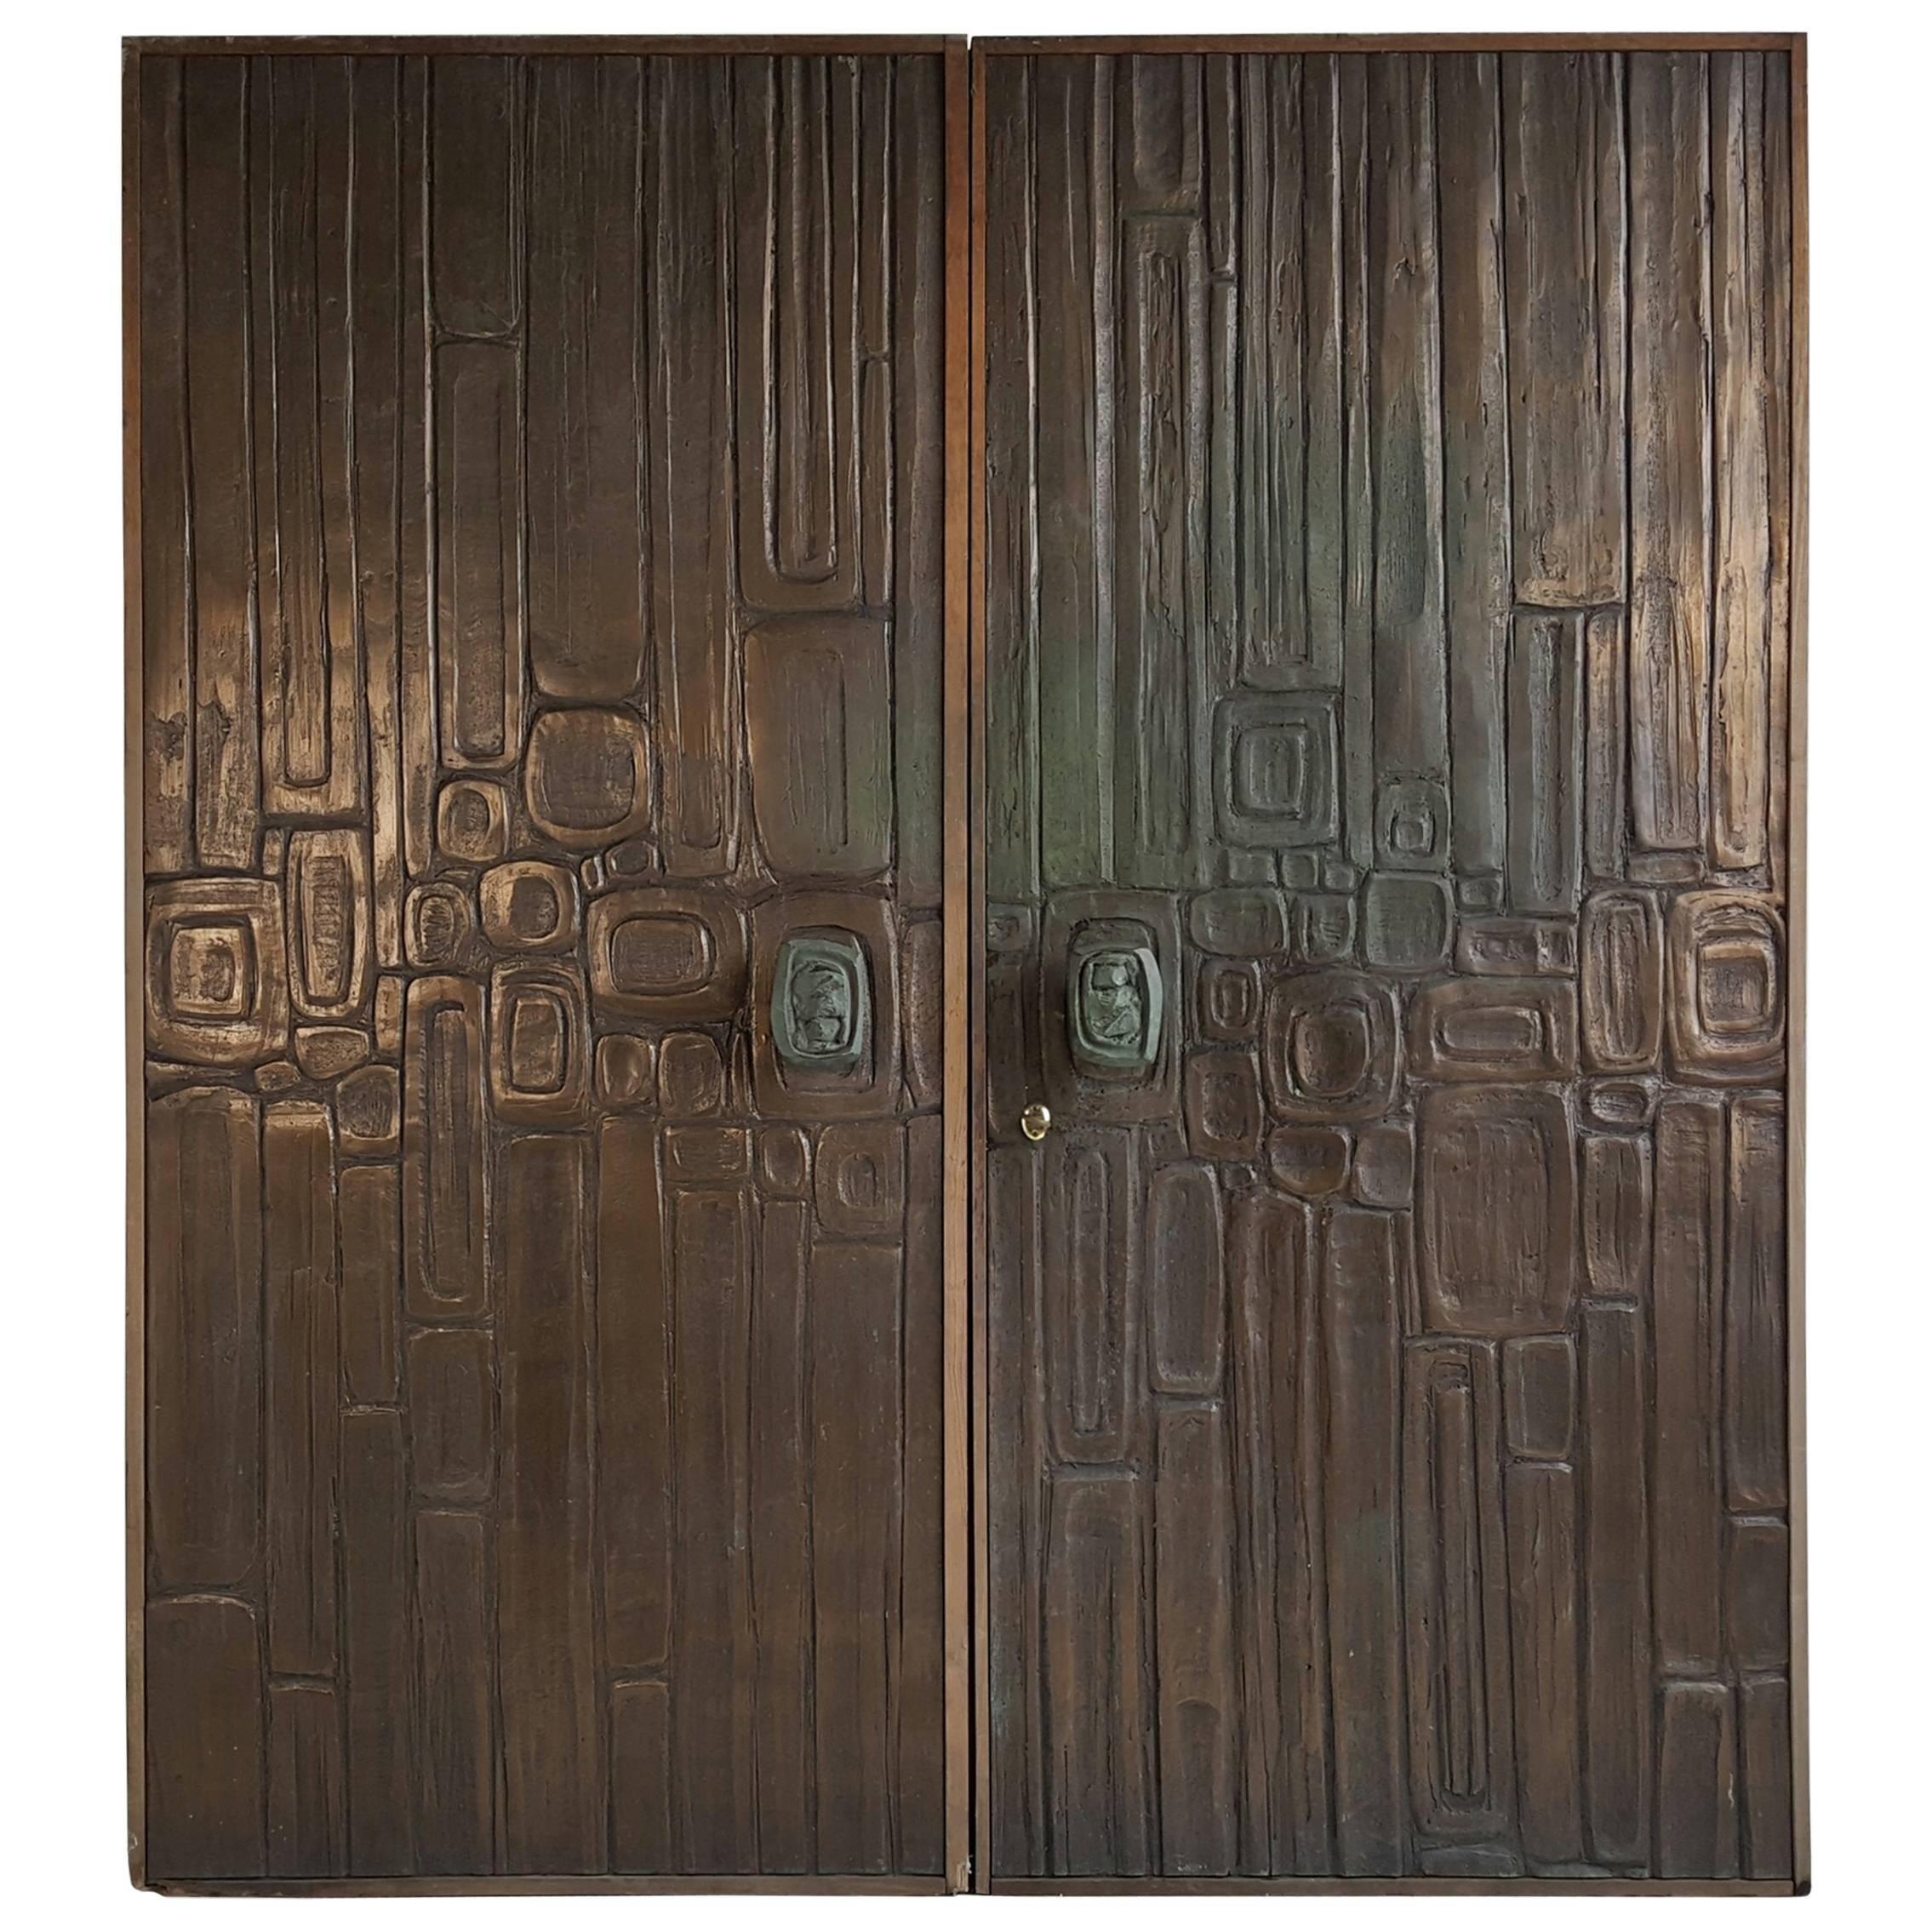 Rare Pair of Bonded Bronze Doors, Style of Forms and Surfaces, Brutalist Design